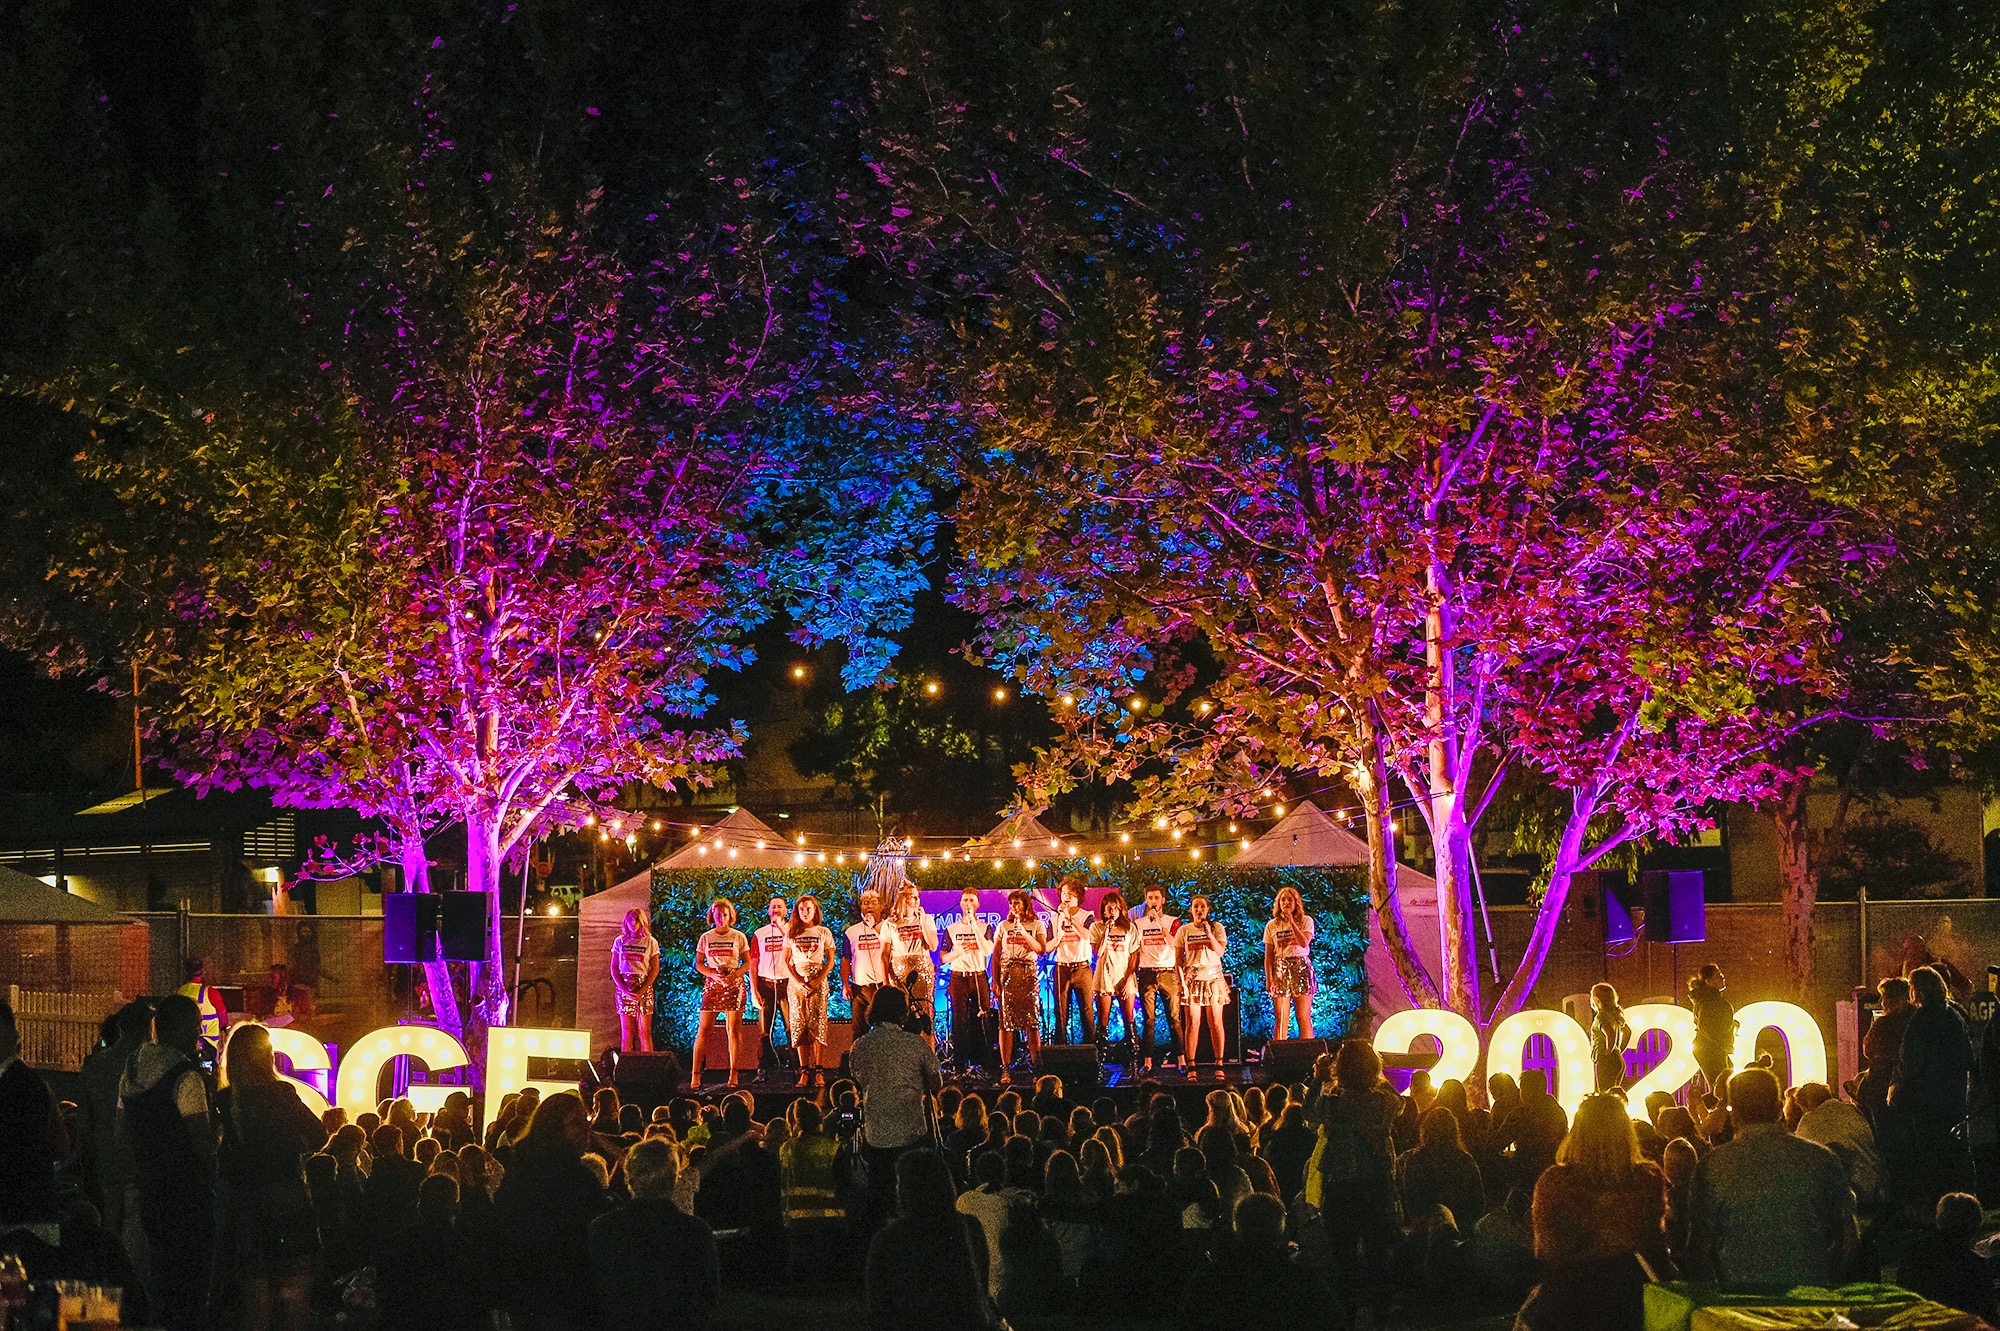 WIN one of two $100 vouchers to spend with a friend on wine and food at Summer Garden Festival